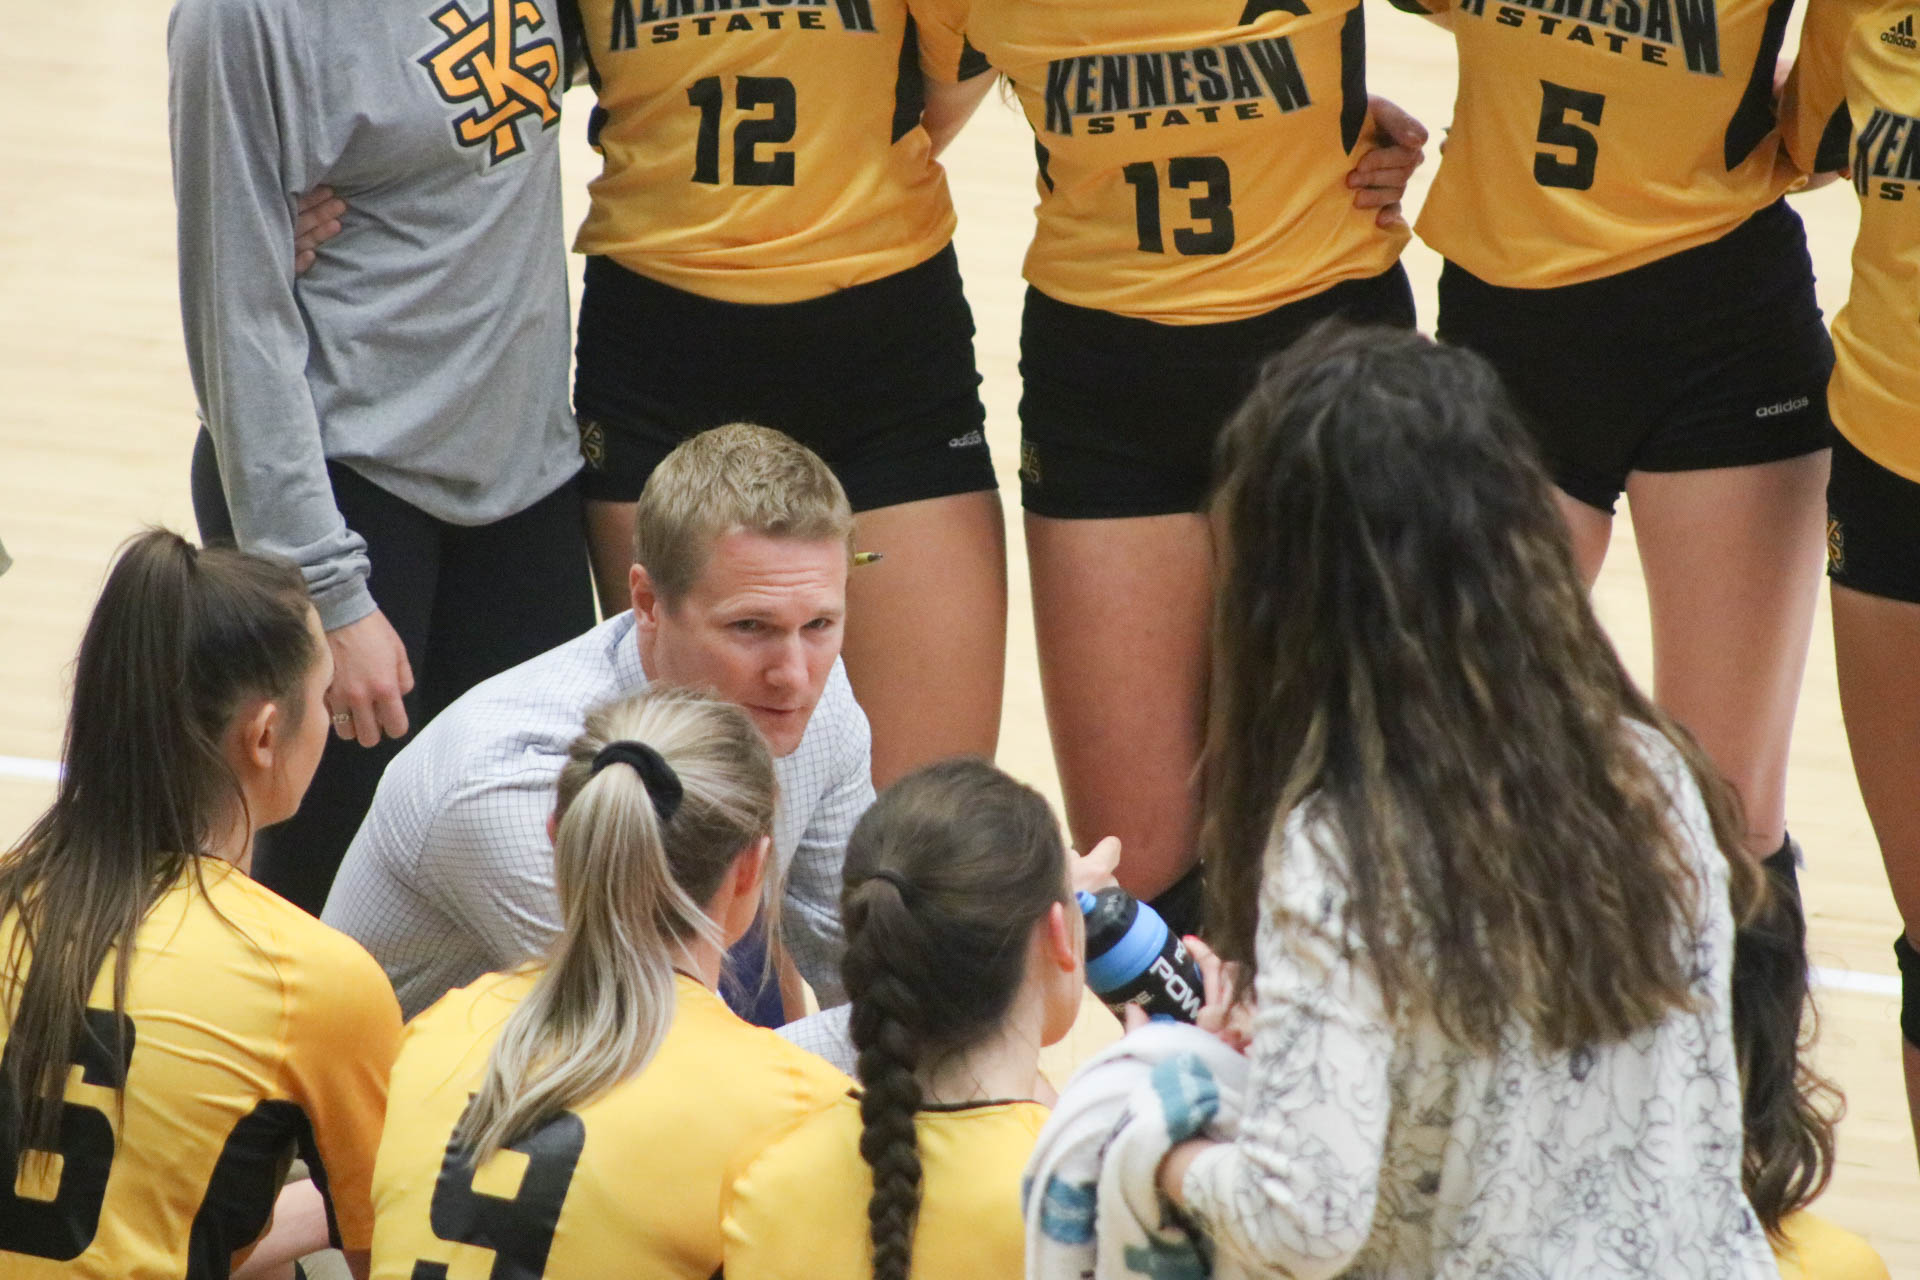 14-game winning streak ends for volleyball